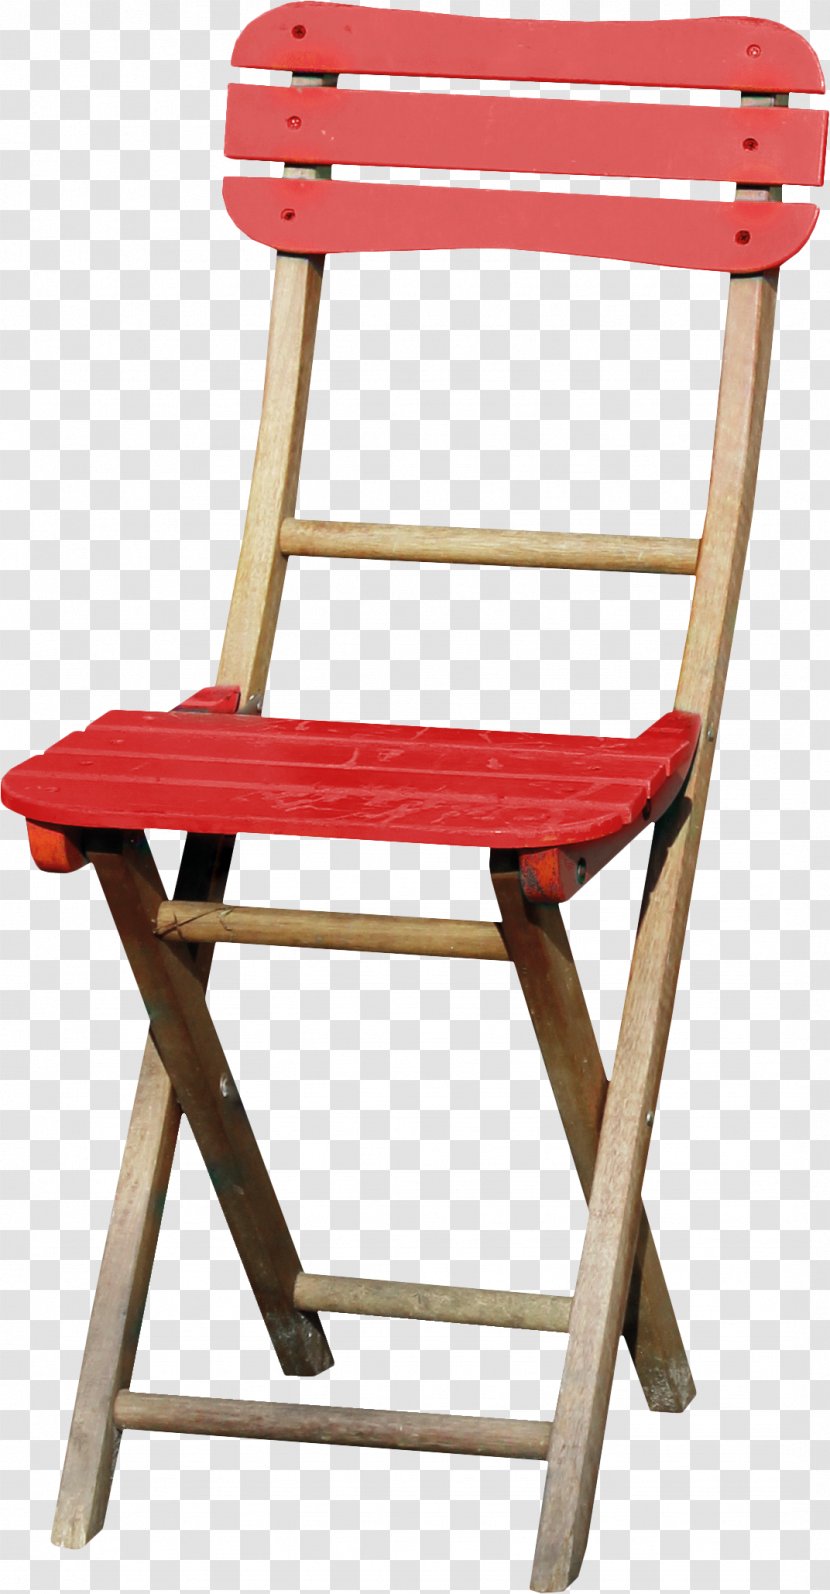 Chair Bench Stool Furniture Transparent PNG